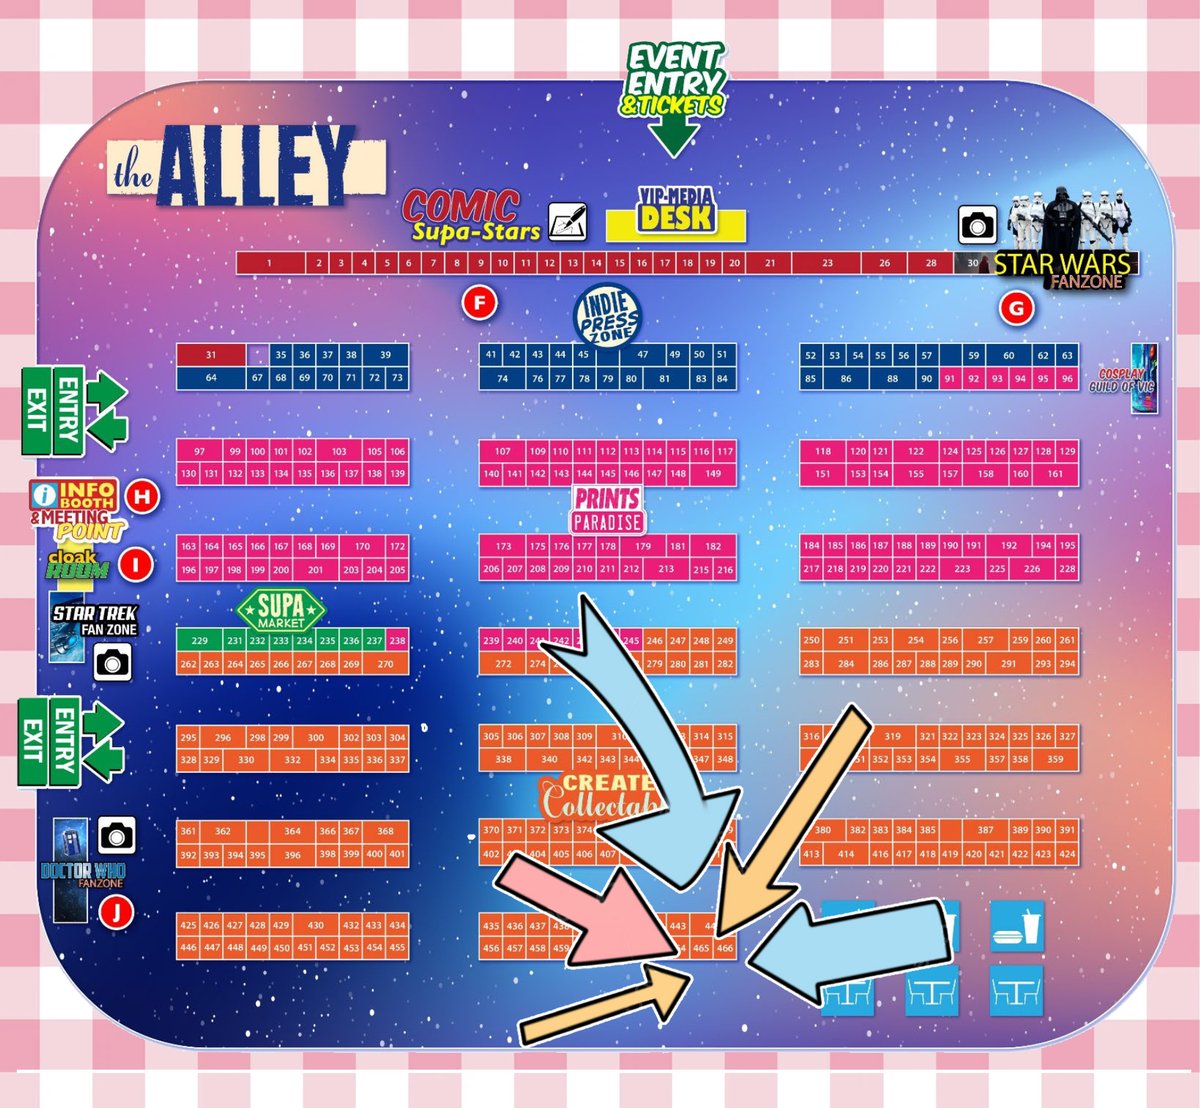 Catalogue for Supanova Melbourne this weekend :) 

Come down and see me and @_pkii at table 465 and grab a Laios print before they sell out again 😁

Plenty of FE3H, DunMeshi, Splatoon and more!